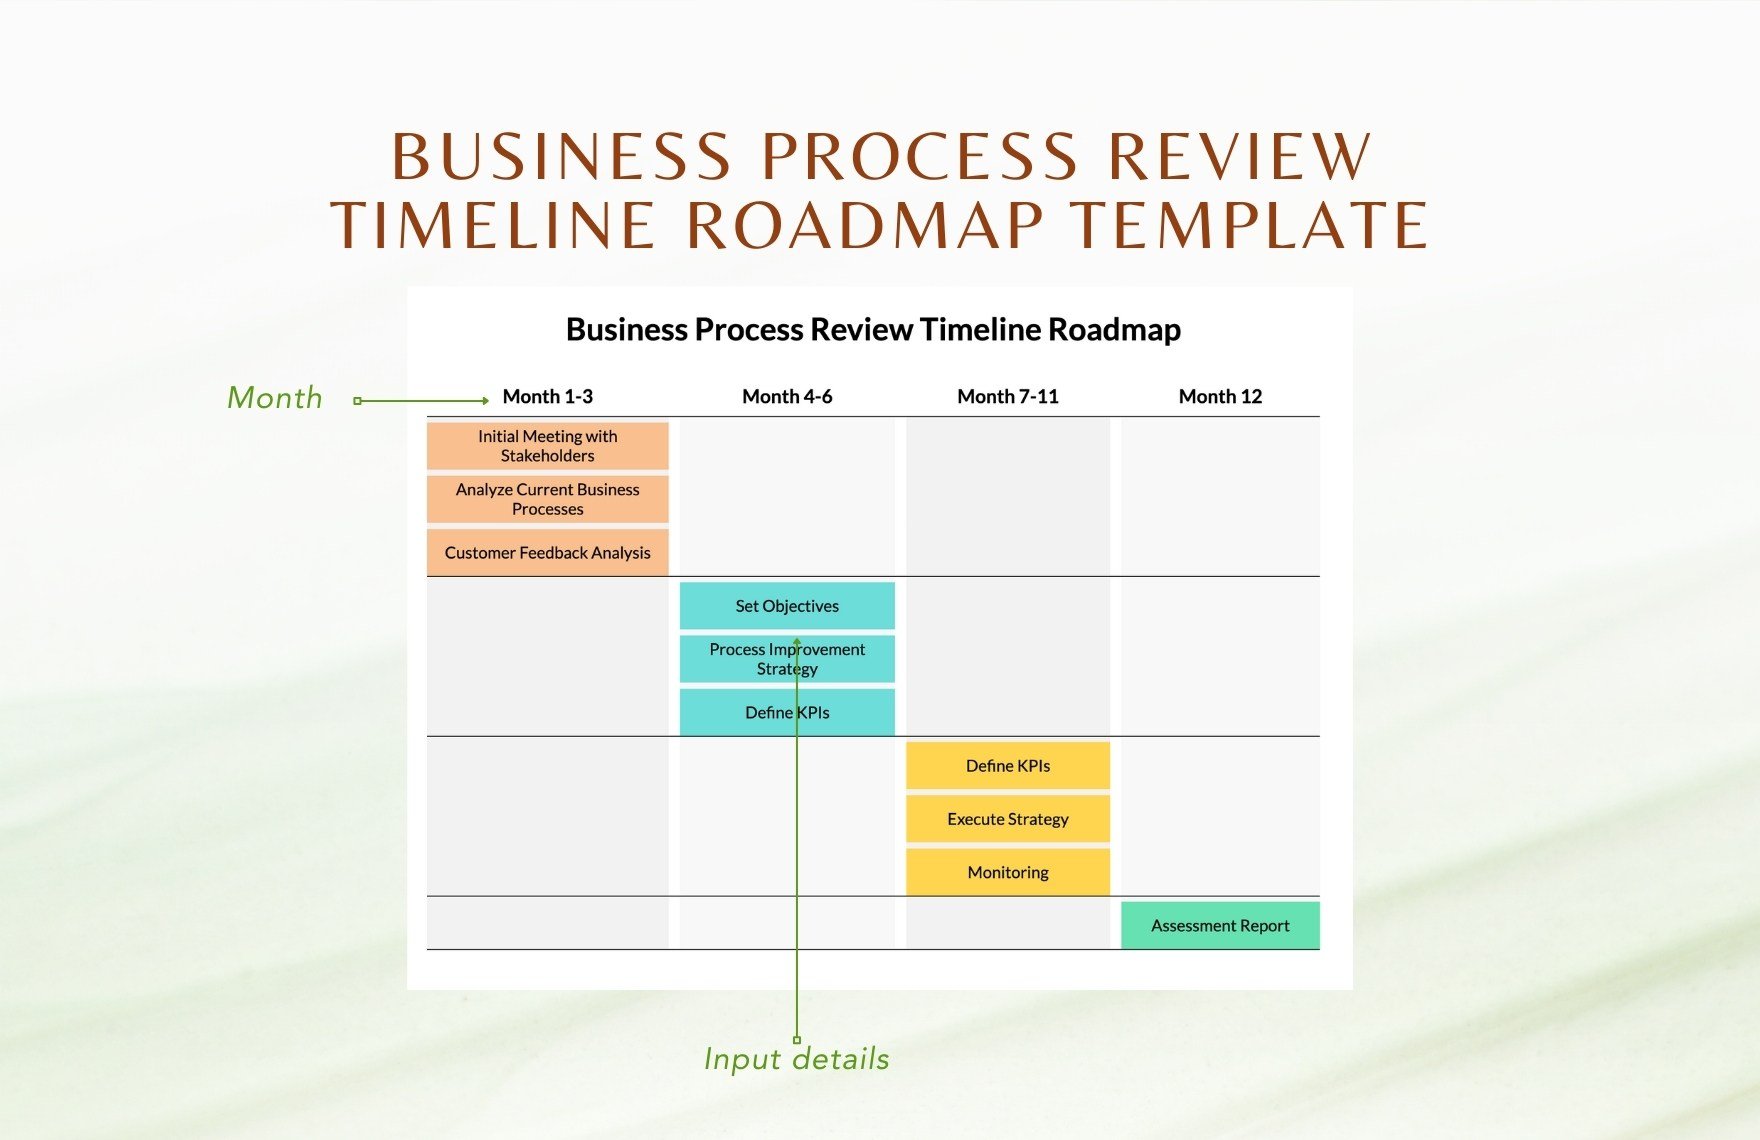 Business Process Review Timeline Roadmap Template